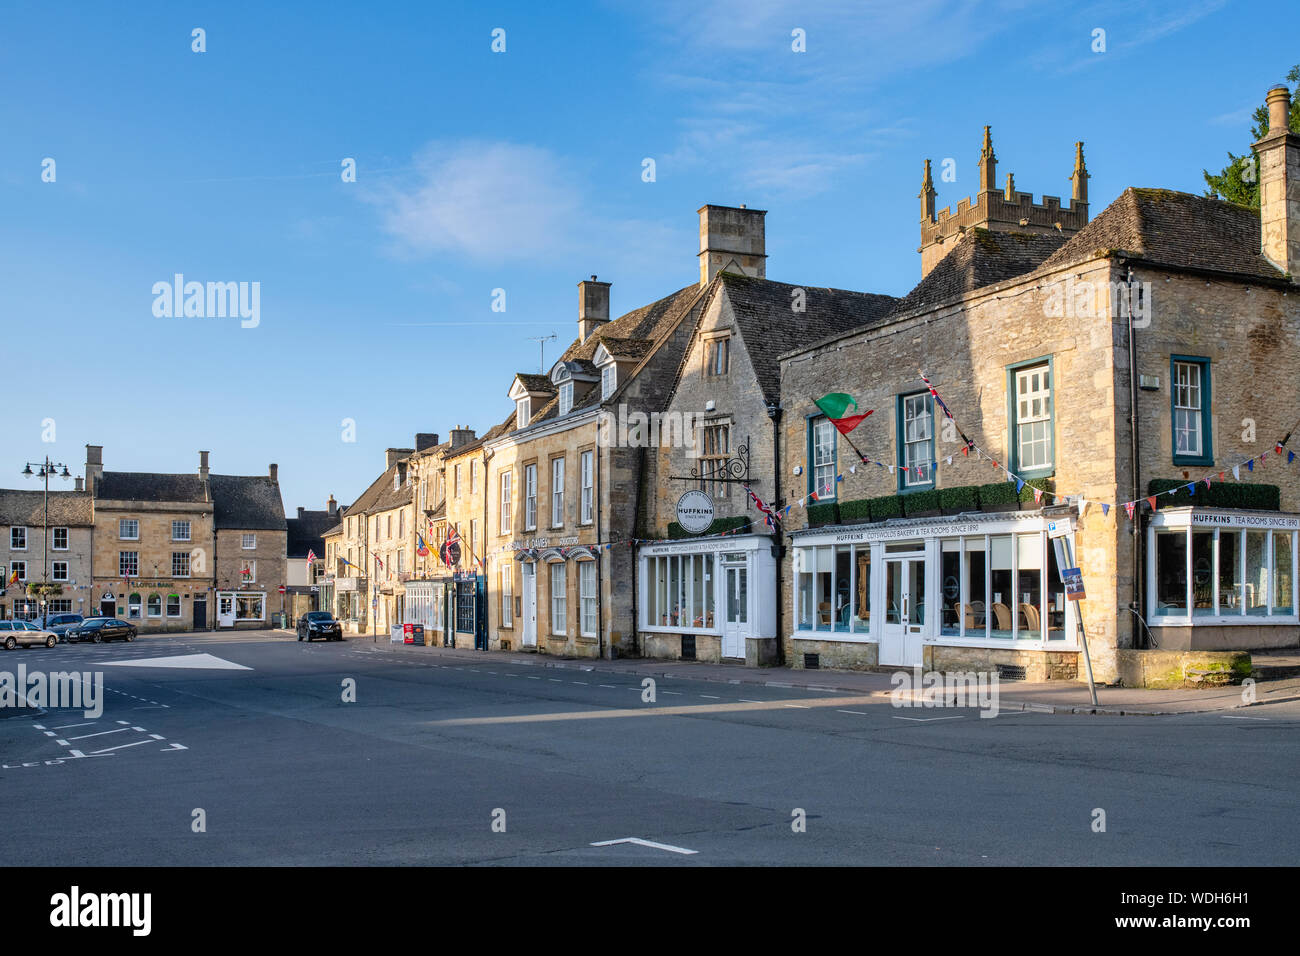 Market place in the early morning light. Stow On the Wold, Cotswolds, Gloucestershire, England Stock Photo